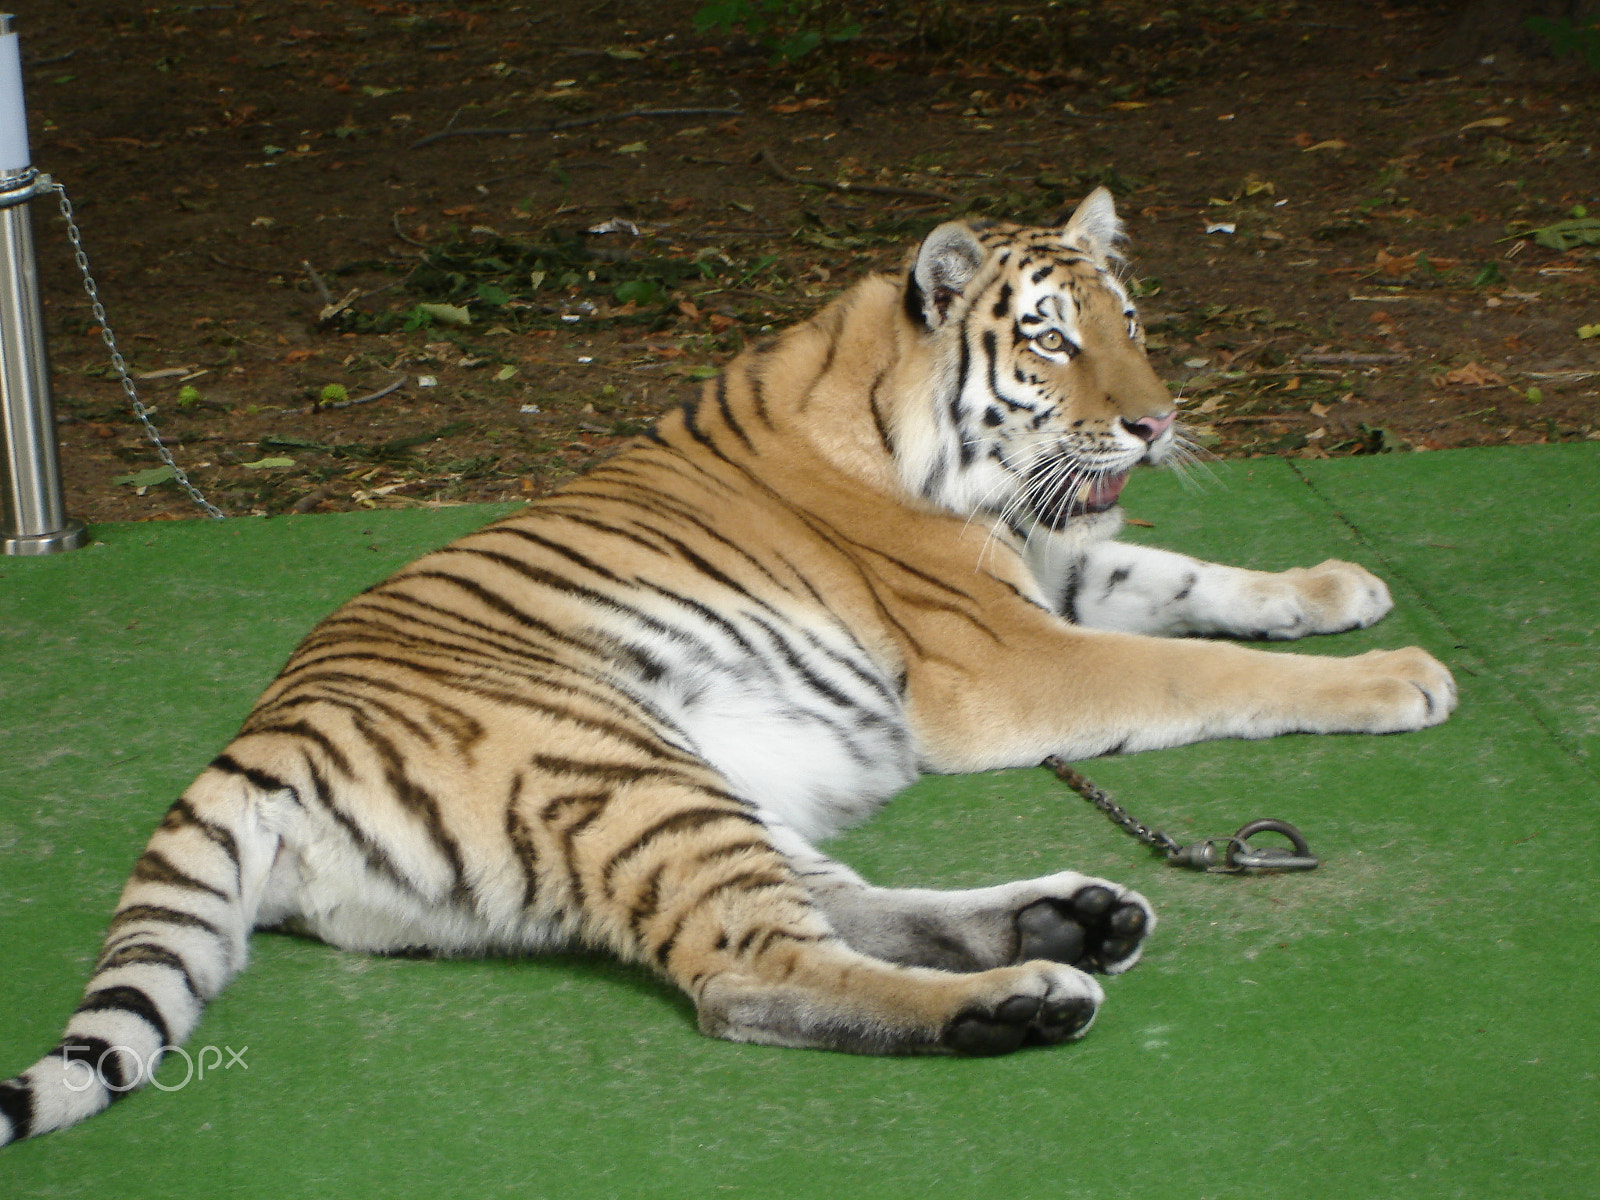 Sony DSC-W7 sample photo. Tiger lying on the green carpet photography